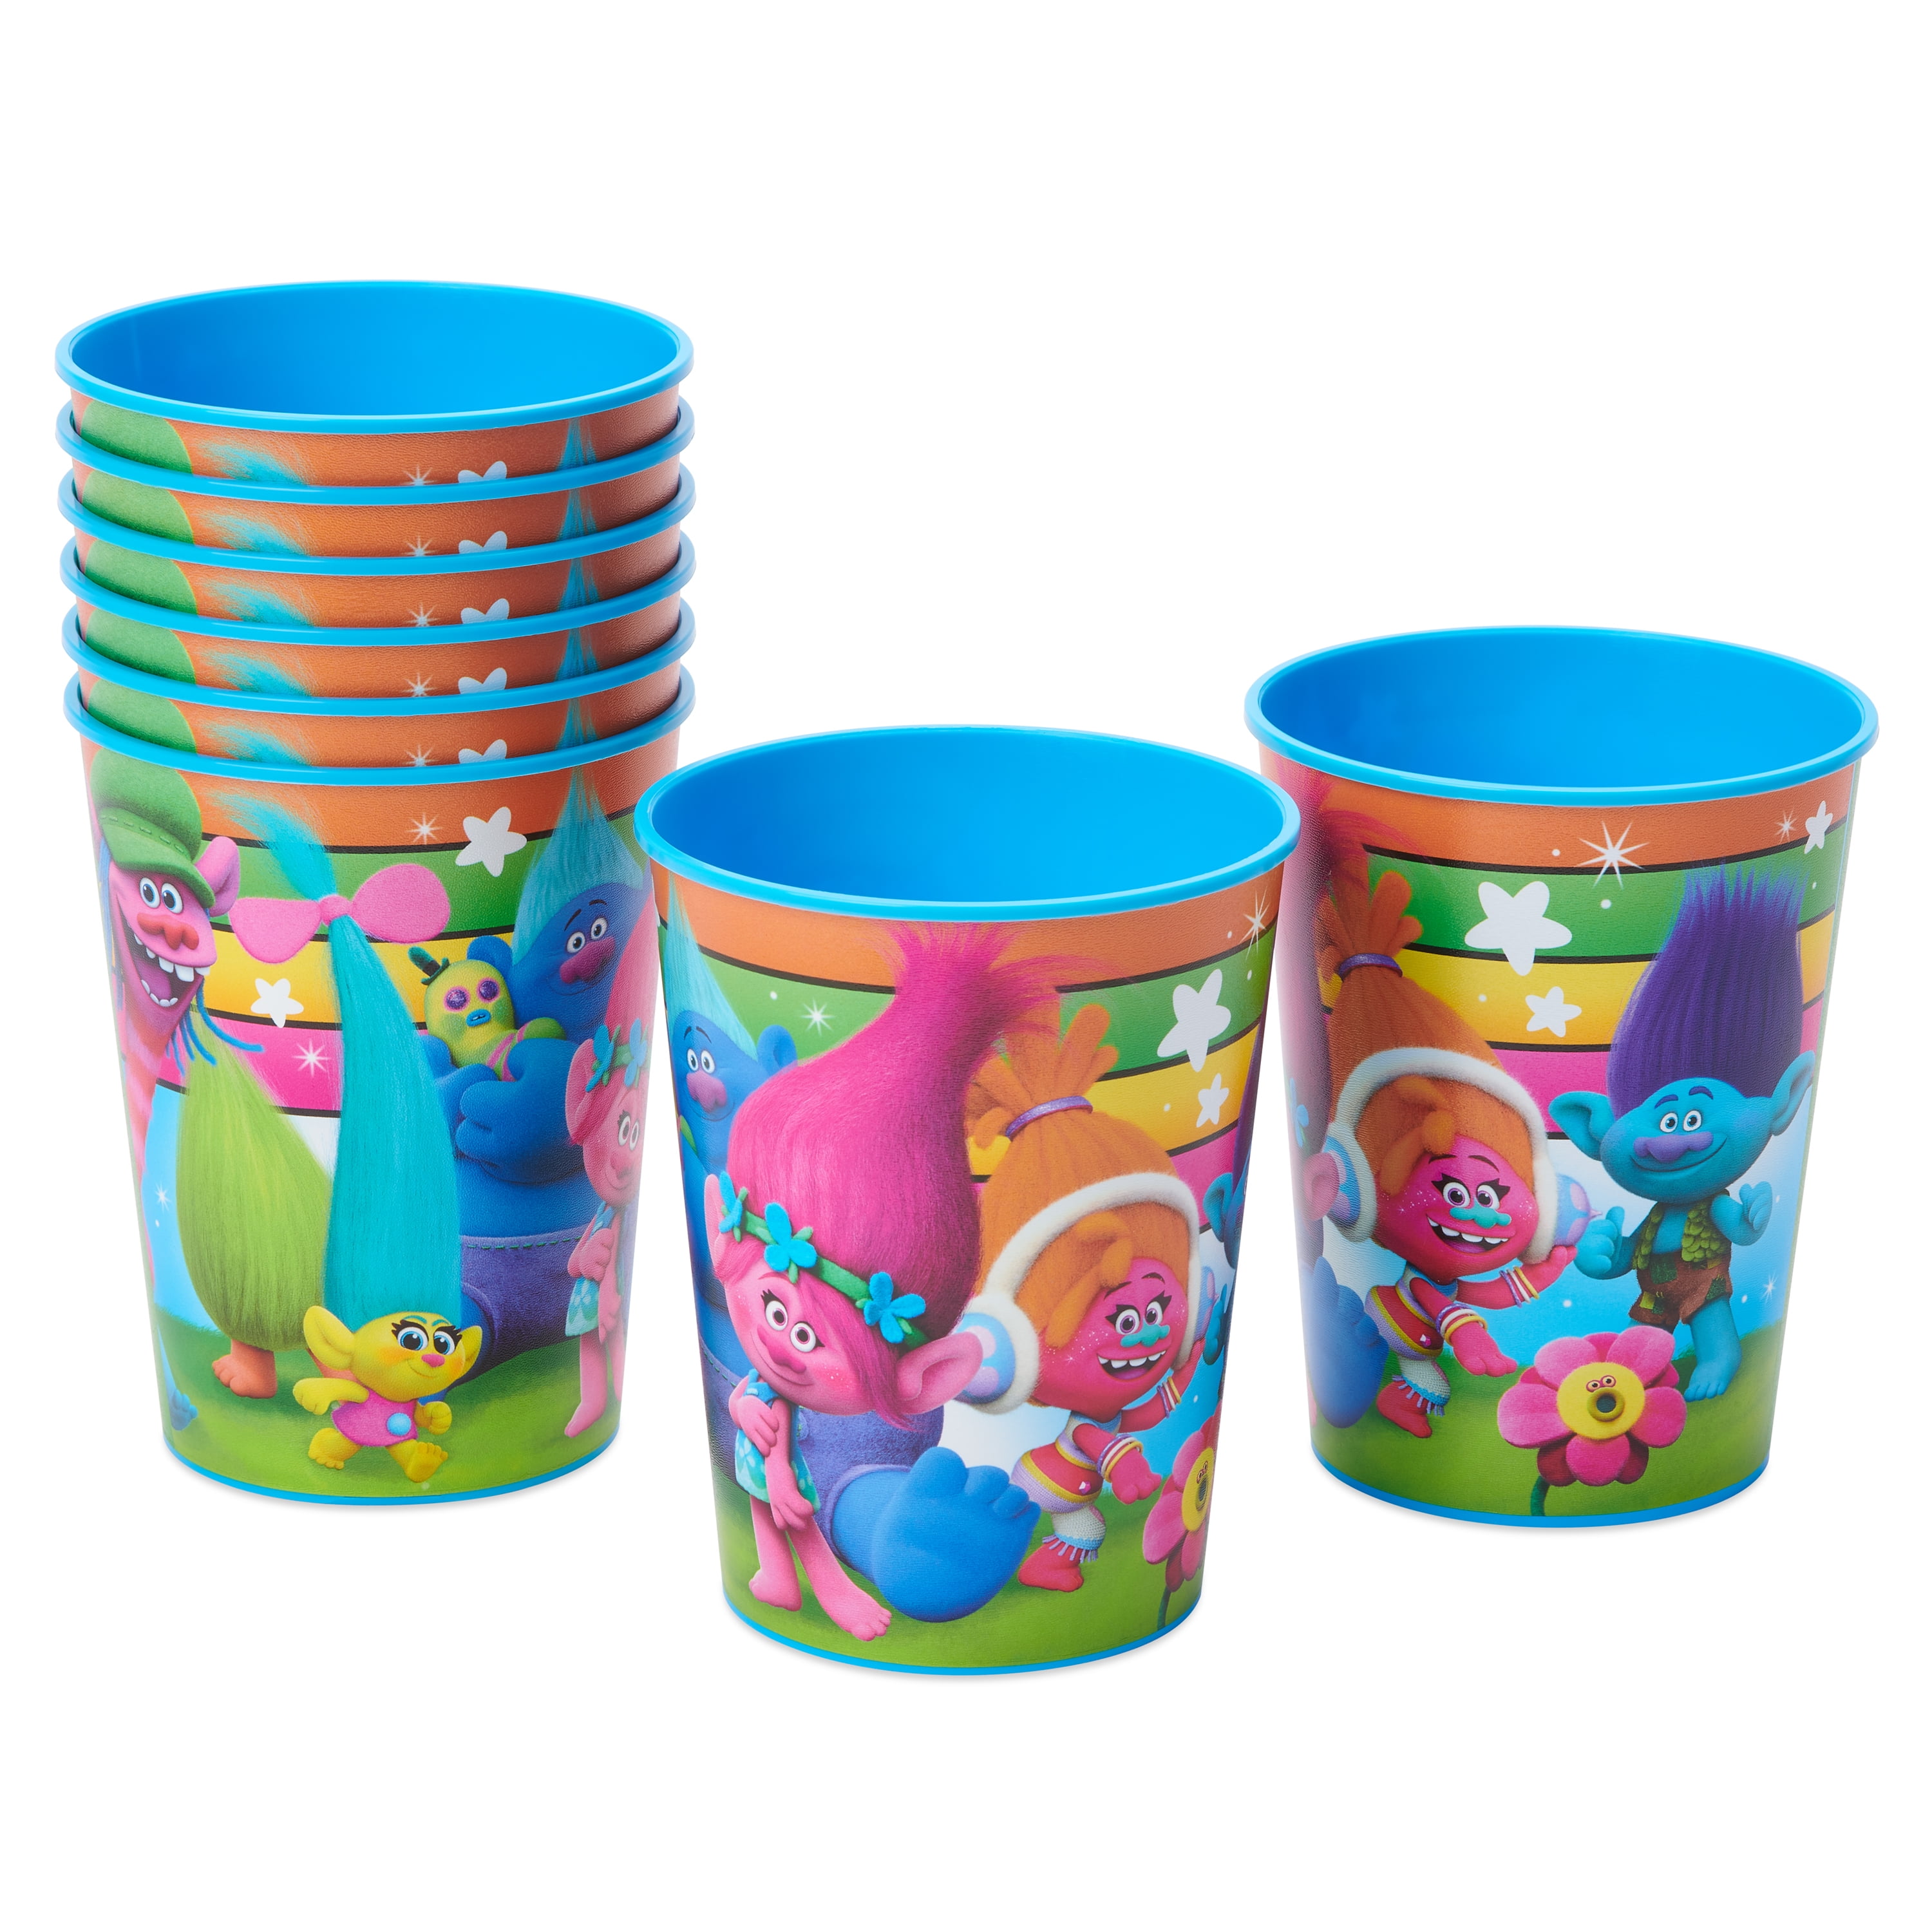  American Greetings 8-Count 16 oz. Reusable Plastic Cups, The  Grinch Christmas Party Supplies : Everything Else